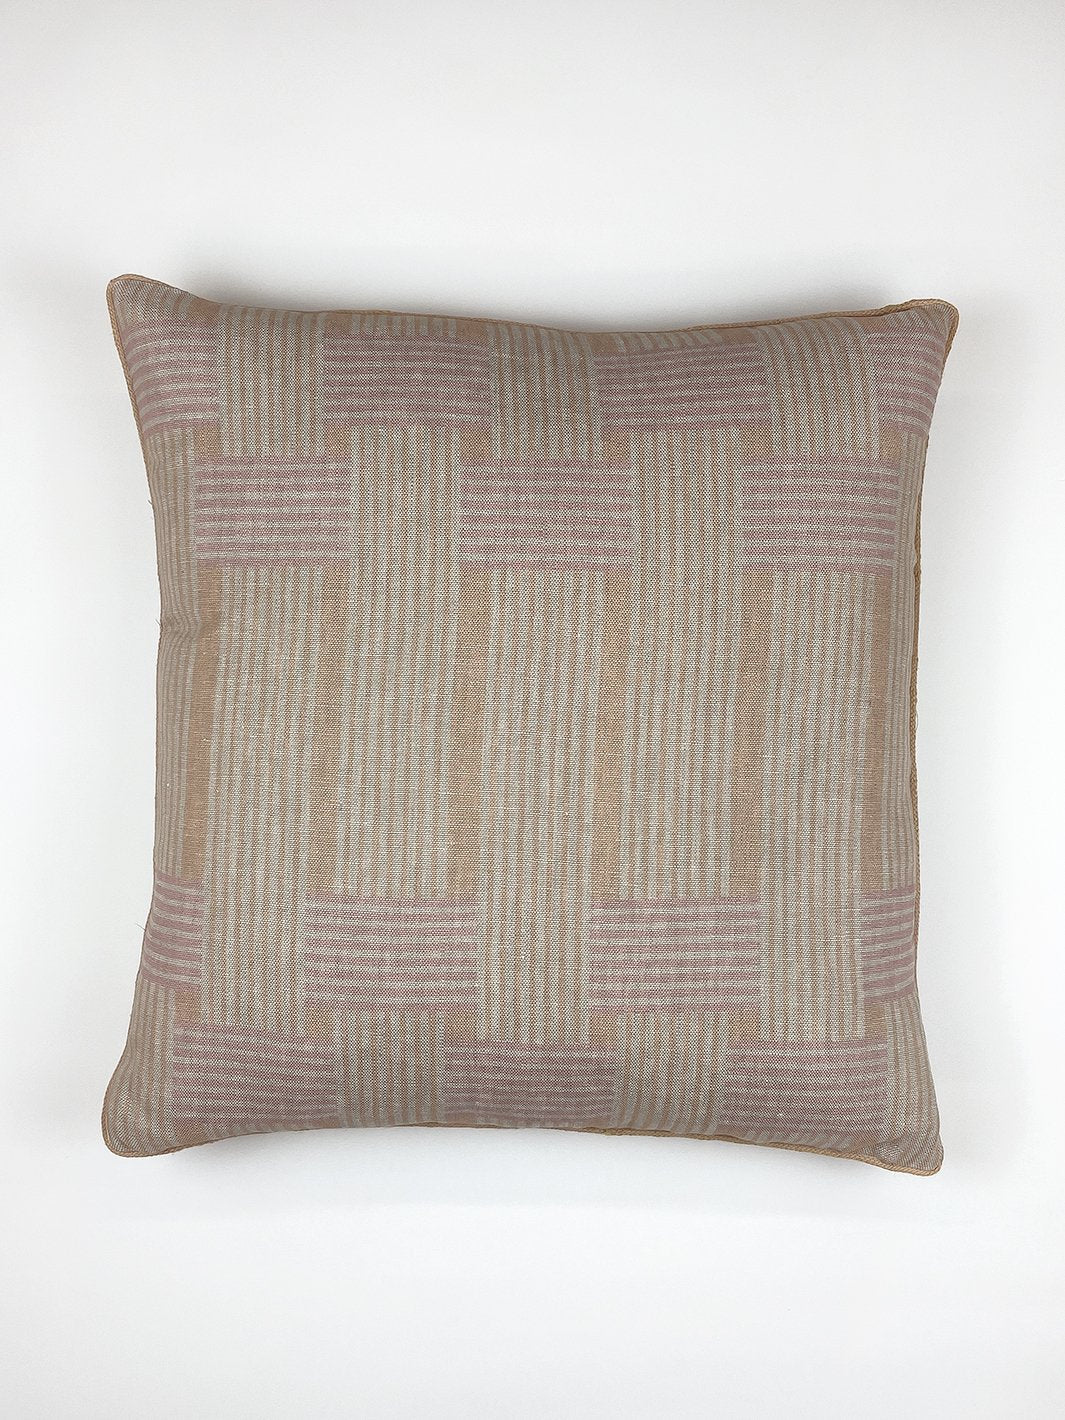 'Roman Holiday Woven' Throw Pillow by Barbie™ - Peach